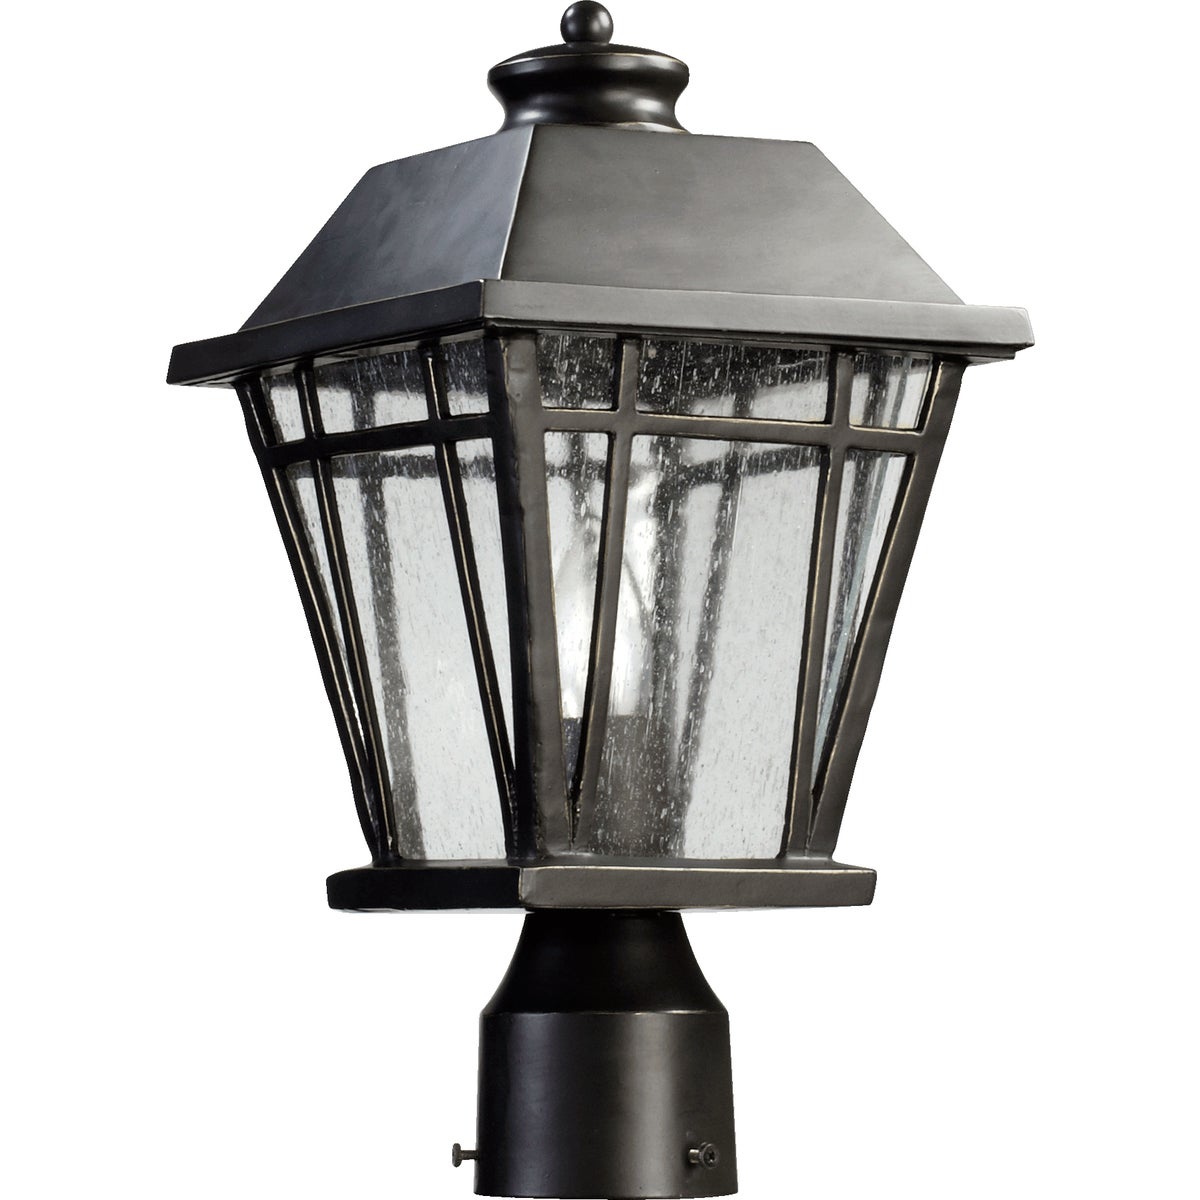 Traditional Outdoor Post Light with clear glass panes and a vintage frame. Adds rustic charm to your outdoor space. Old World finish and decorative curve complete the timeless design. Perfect for wet locations. 8"W x 15"H. 100W. UL Listed. 2-year warranty.